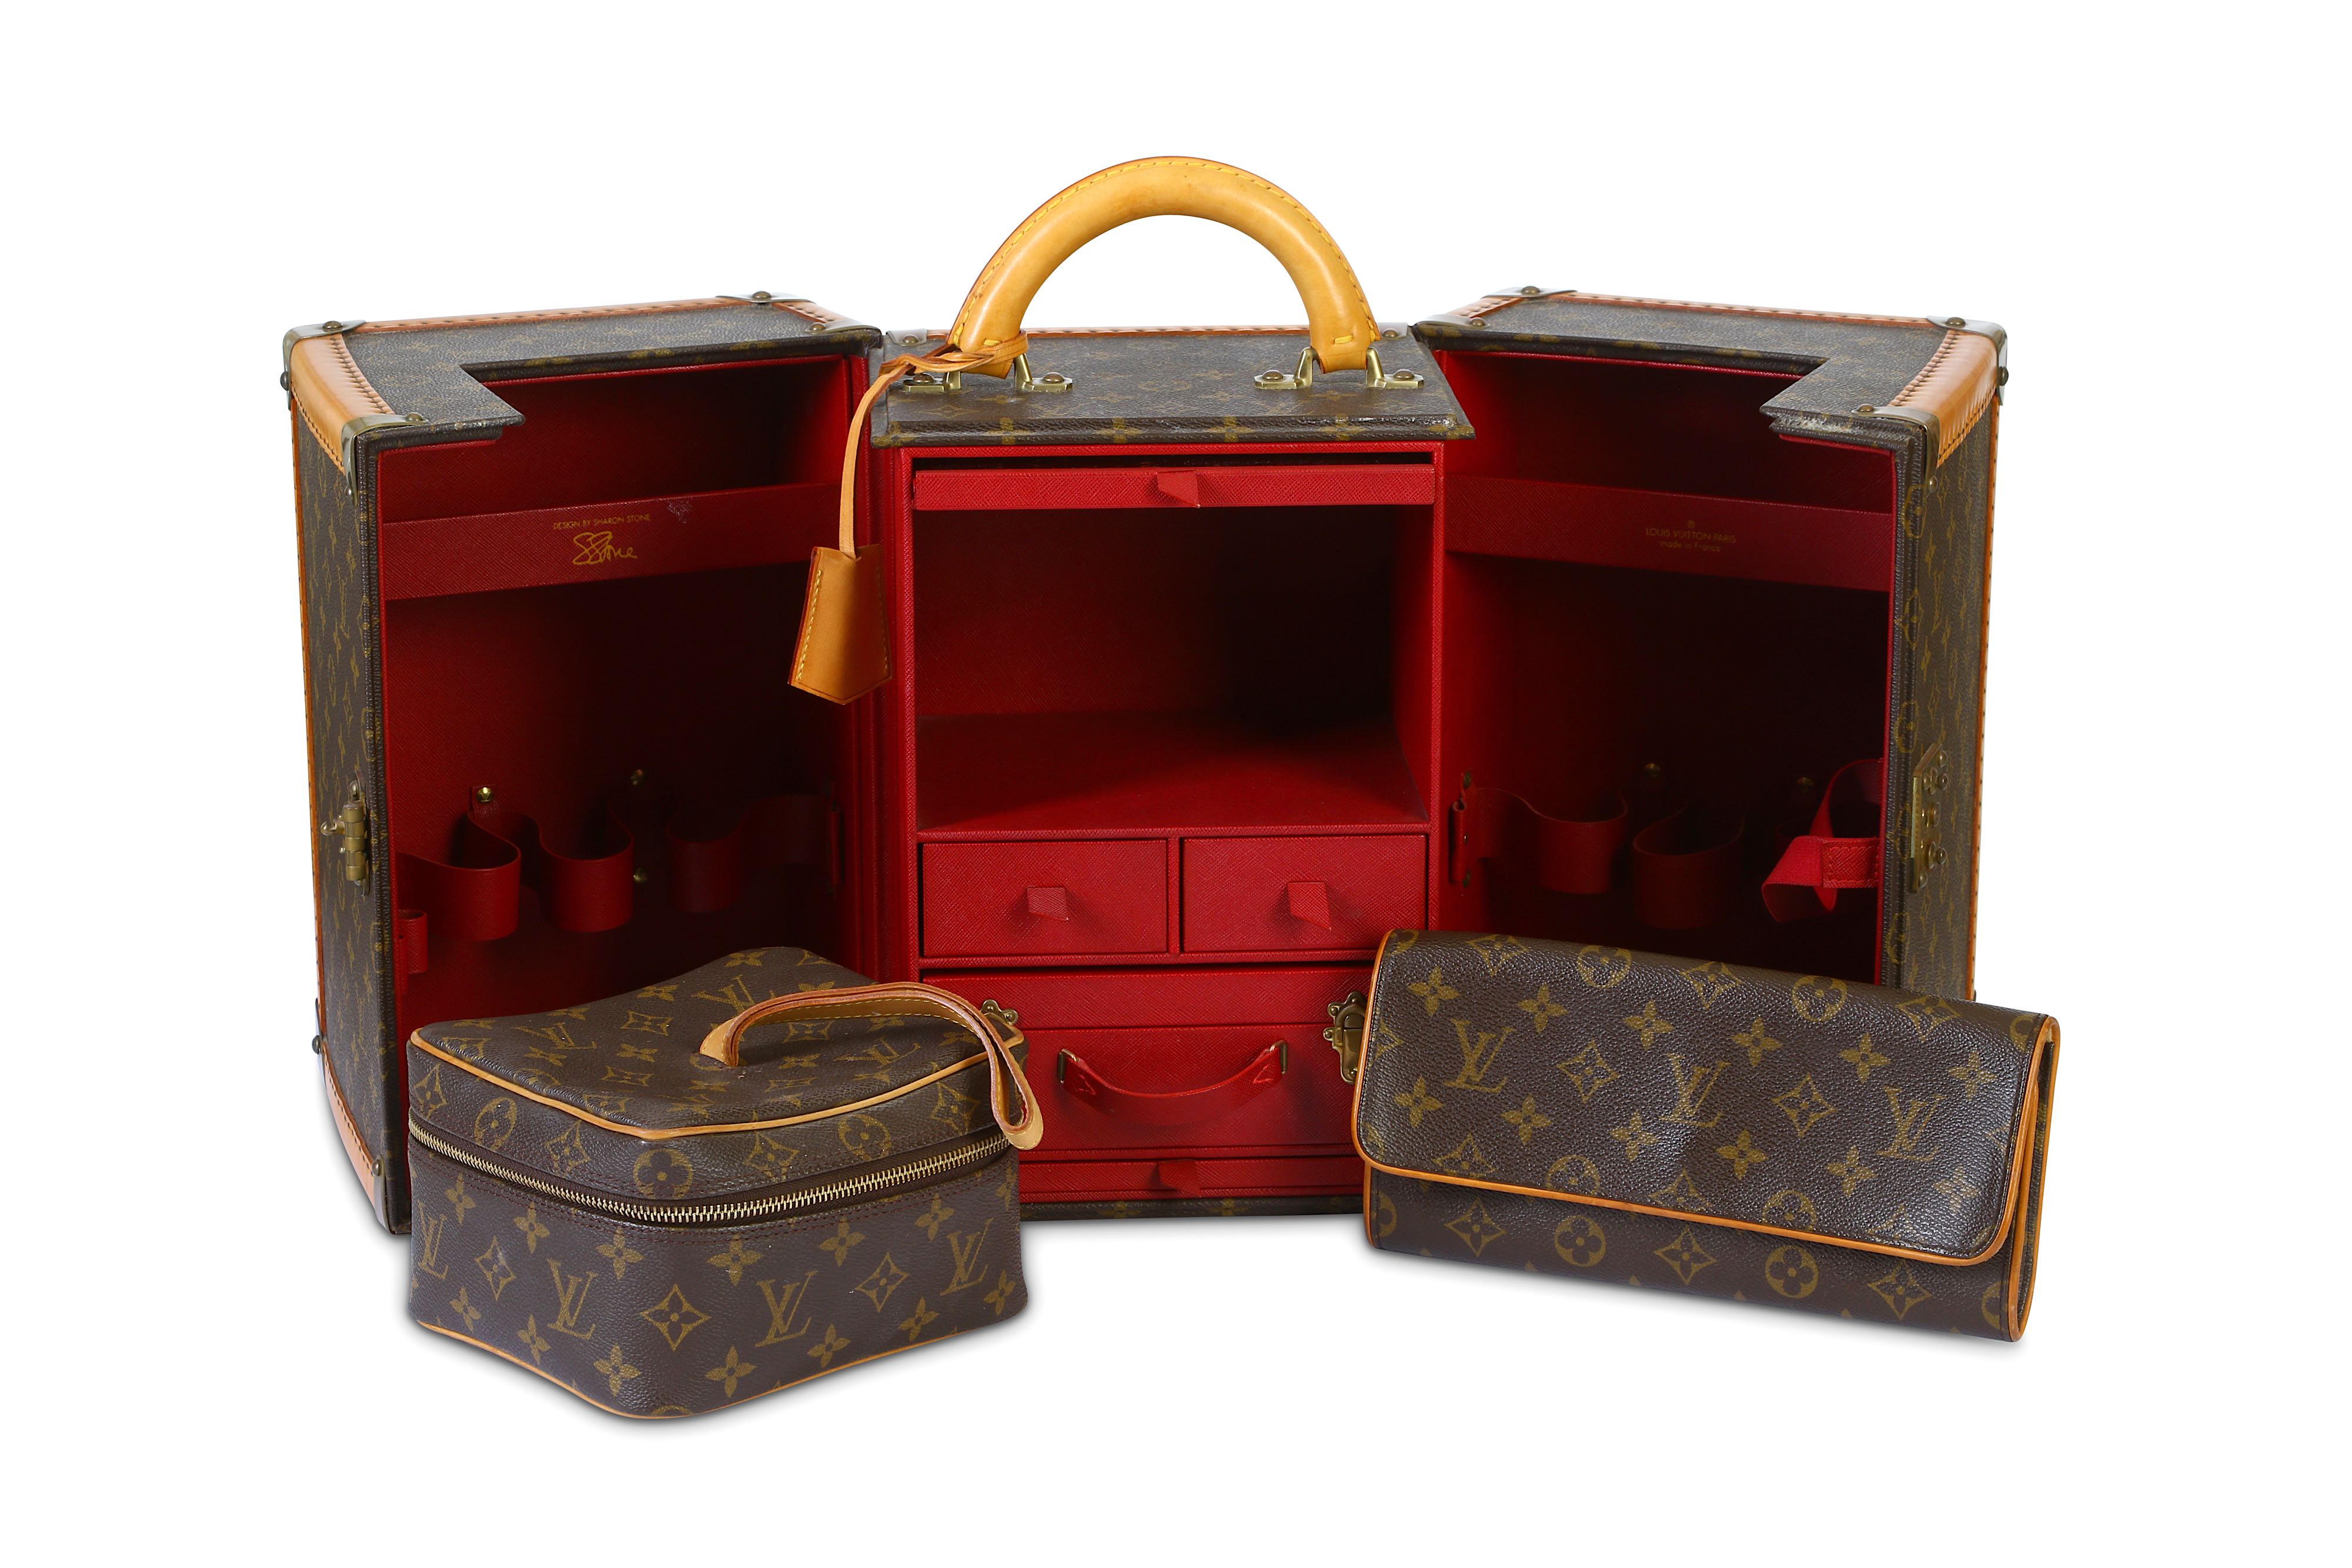 Louis Vuitton Trunk: Vanity Case designed by Sharon Stone for amfAR  Foundation 